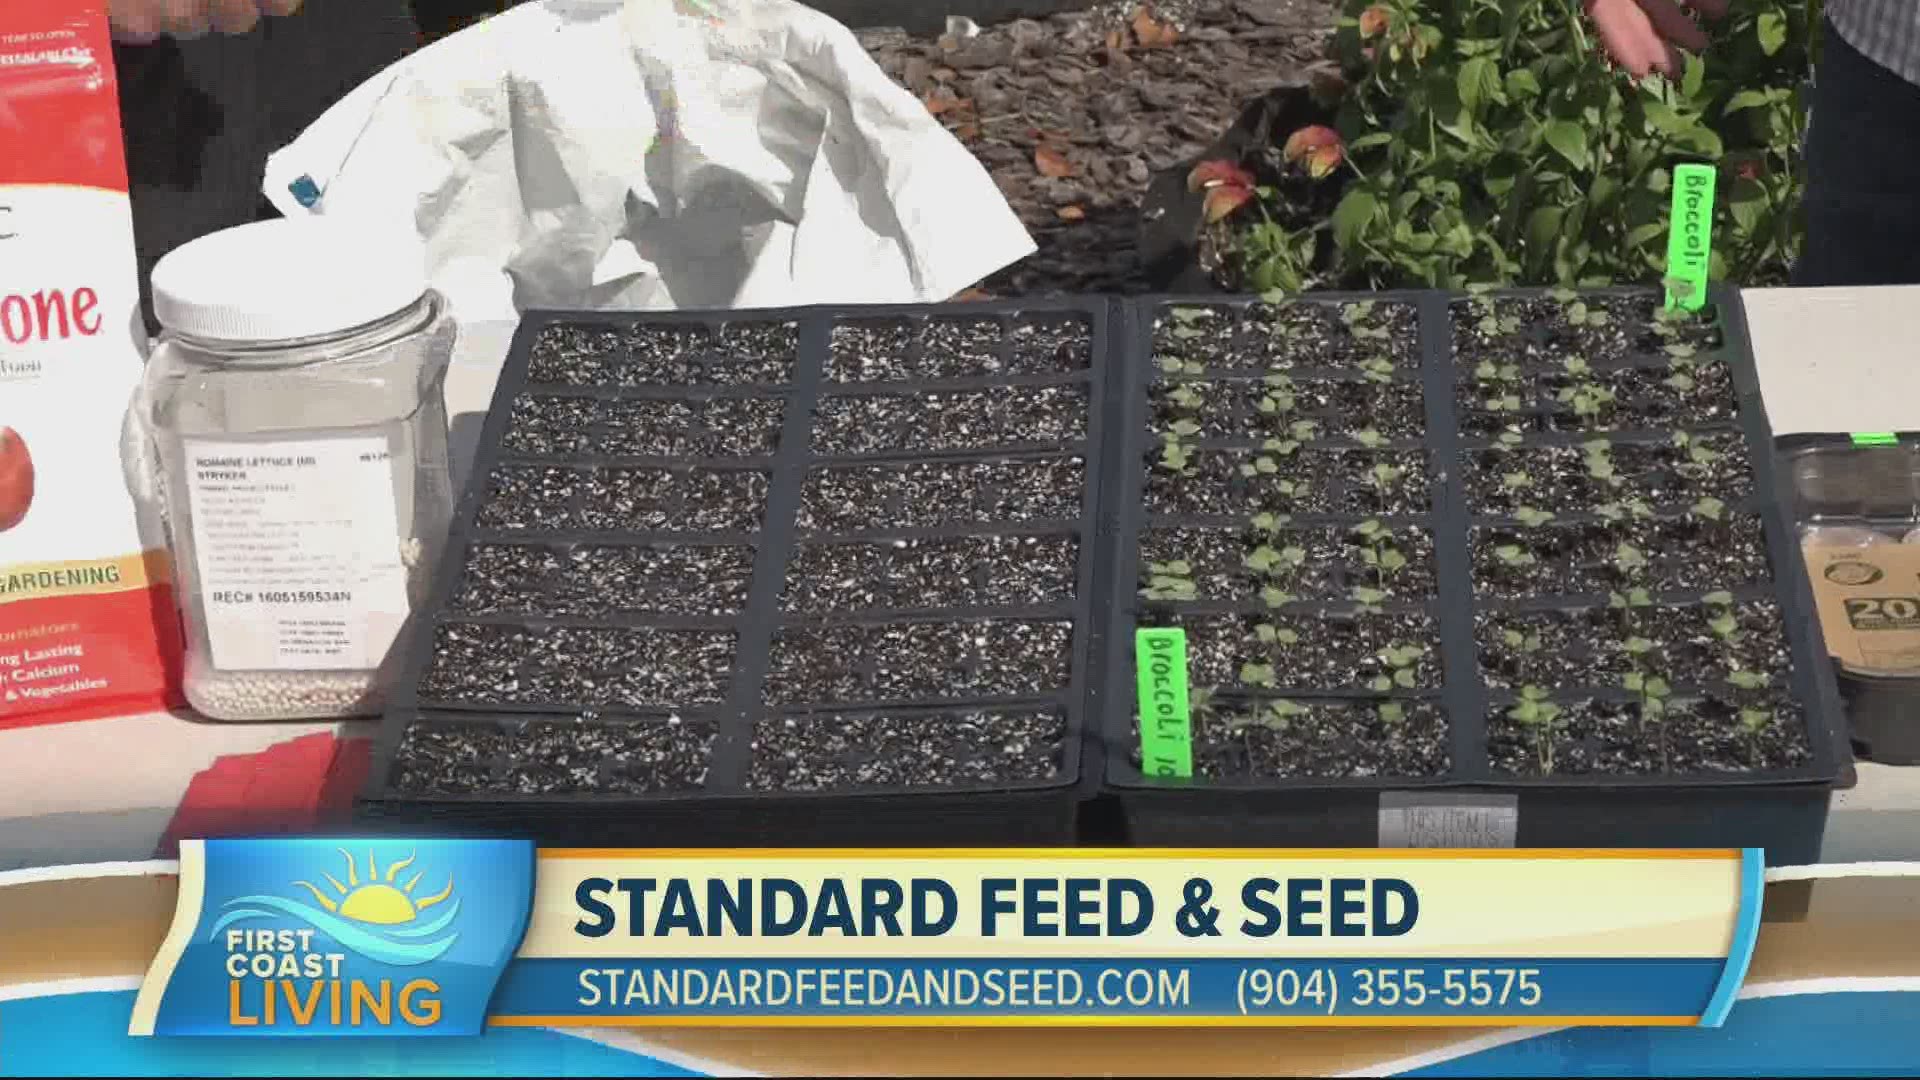 Our friends at Standard Feed & Seed show us how we can upgrade our gardens this season!